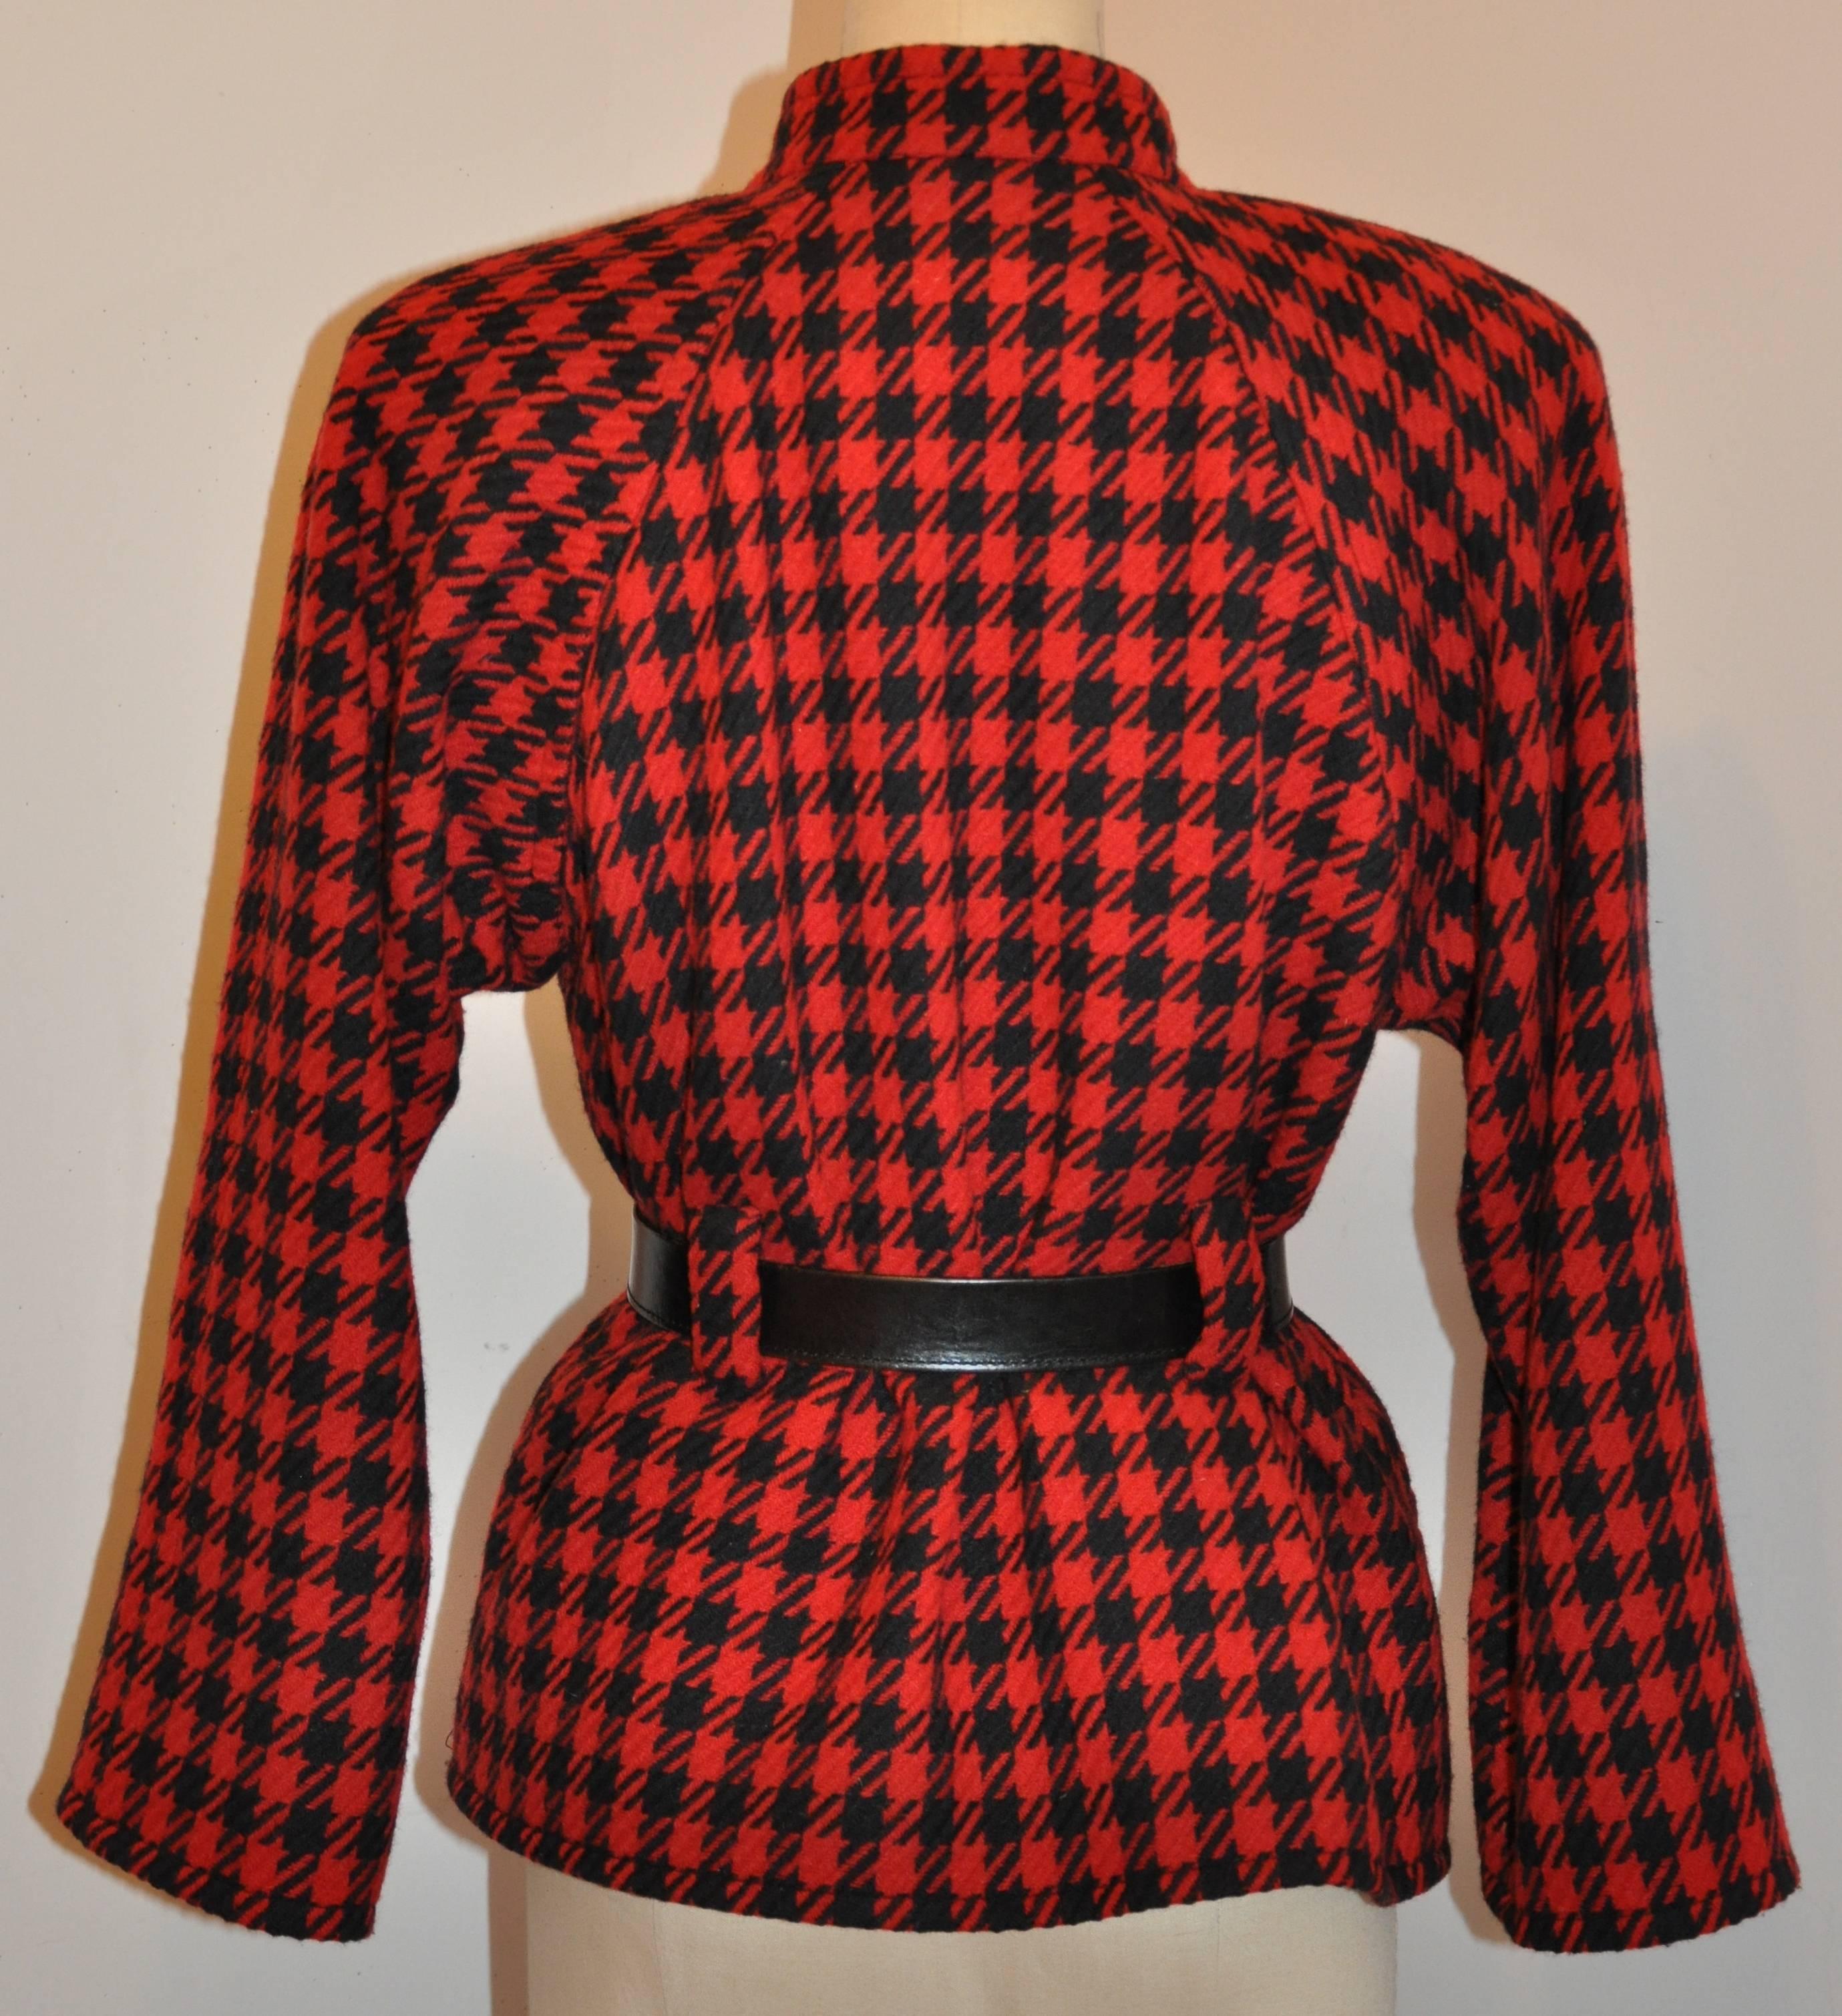        Yves Saint Laurent wonderfully tailored black & red jacket gives the option of wearing with or without a belt. (Belt shown in photo is not included).  Fully lined with black silk, this five-button front jacket measures 18